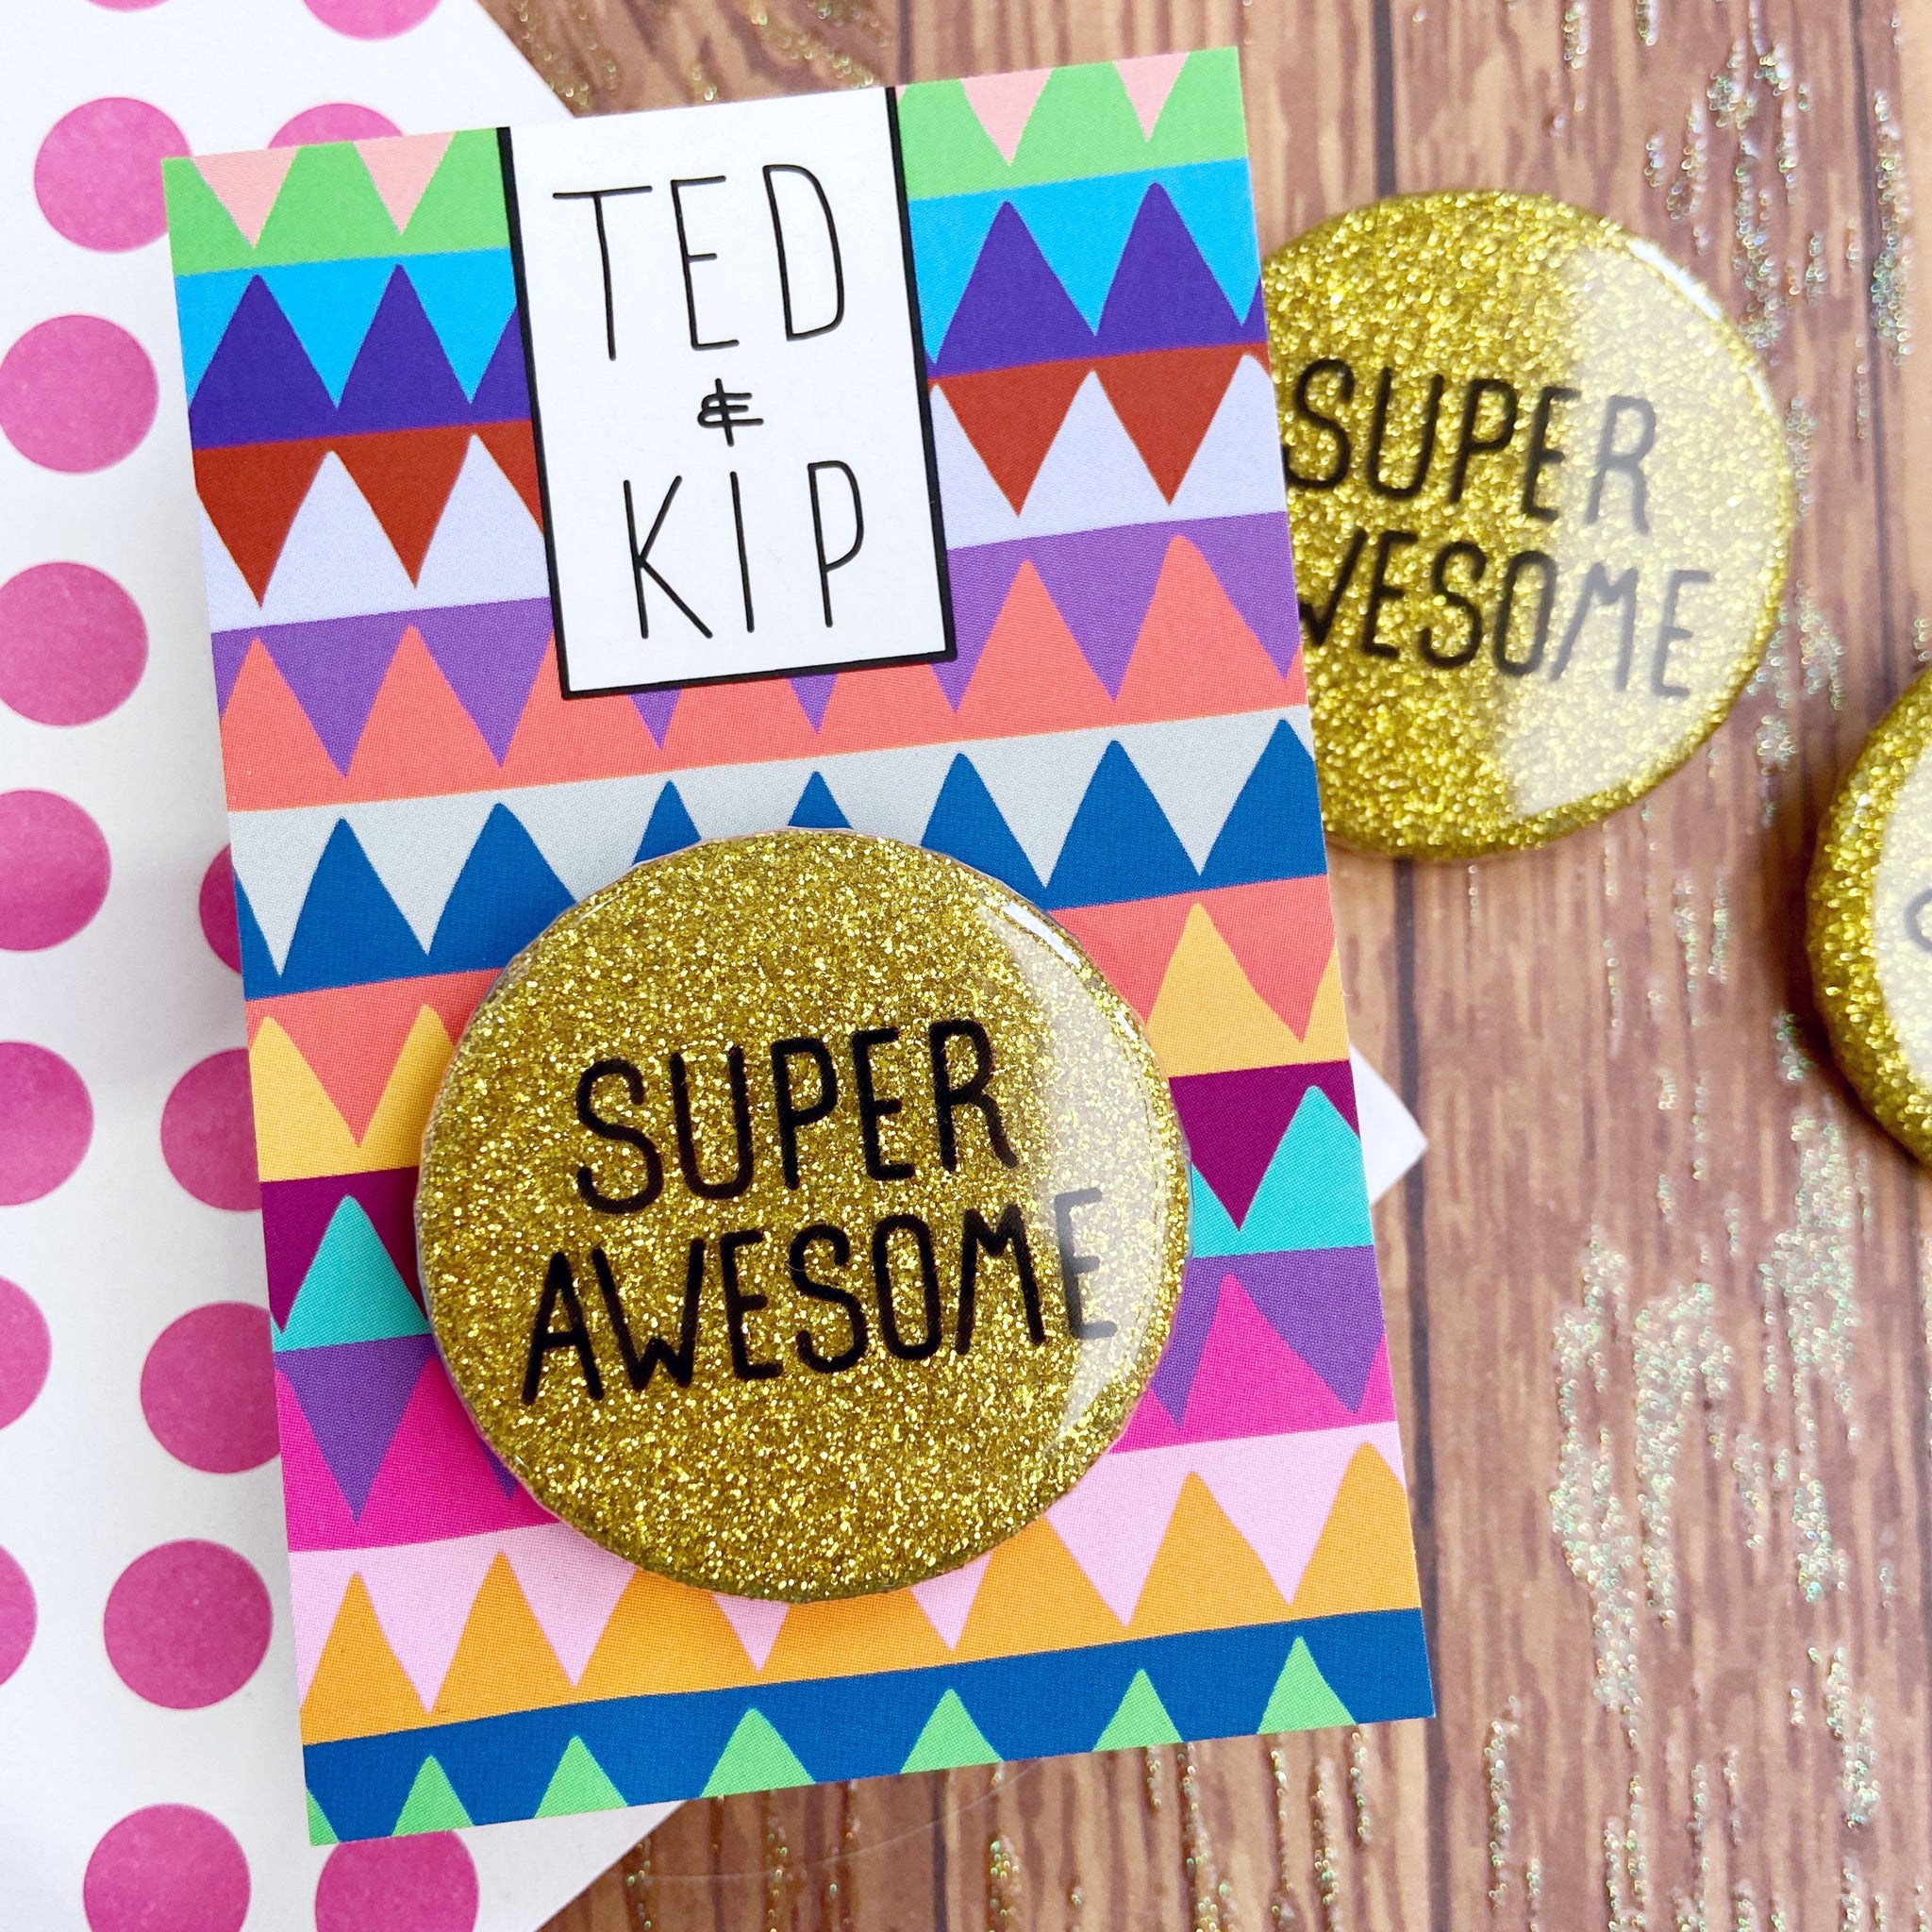 Super Awesome Gold Glitter Button Badge